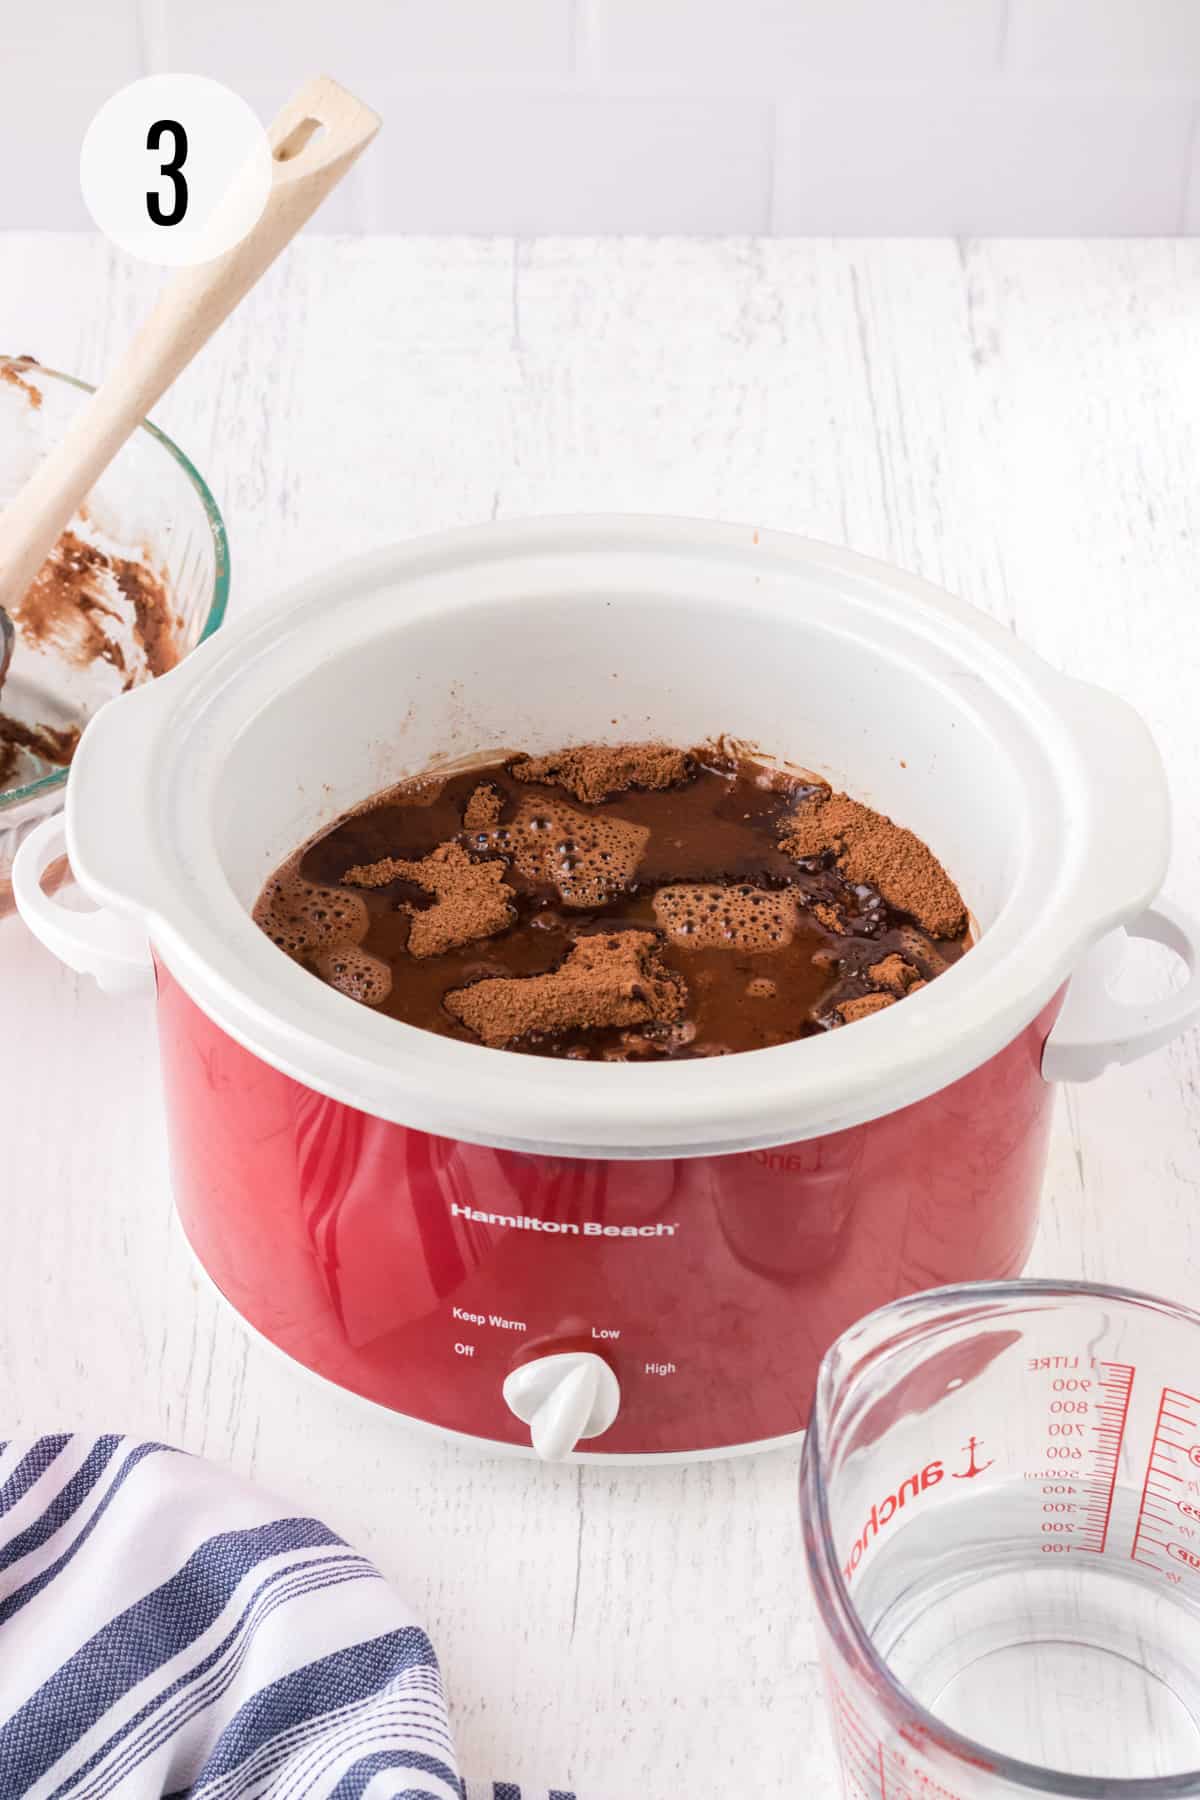 Red and white slow cooker with chocolate lava cake mixture inside and glass measuring cup in lower right, glass batter bowl with spoon in upper left and blue and white linen in lower left corner. 